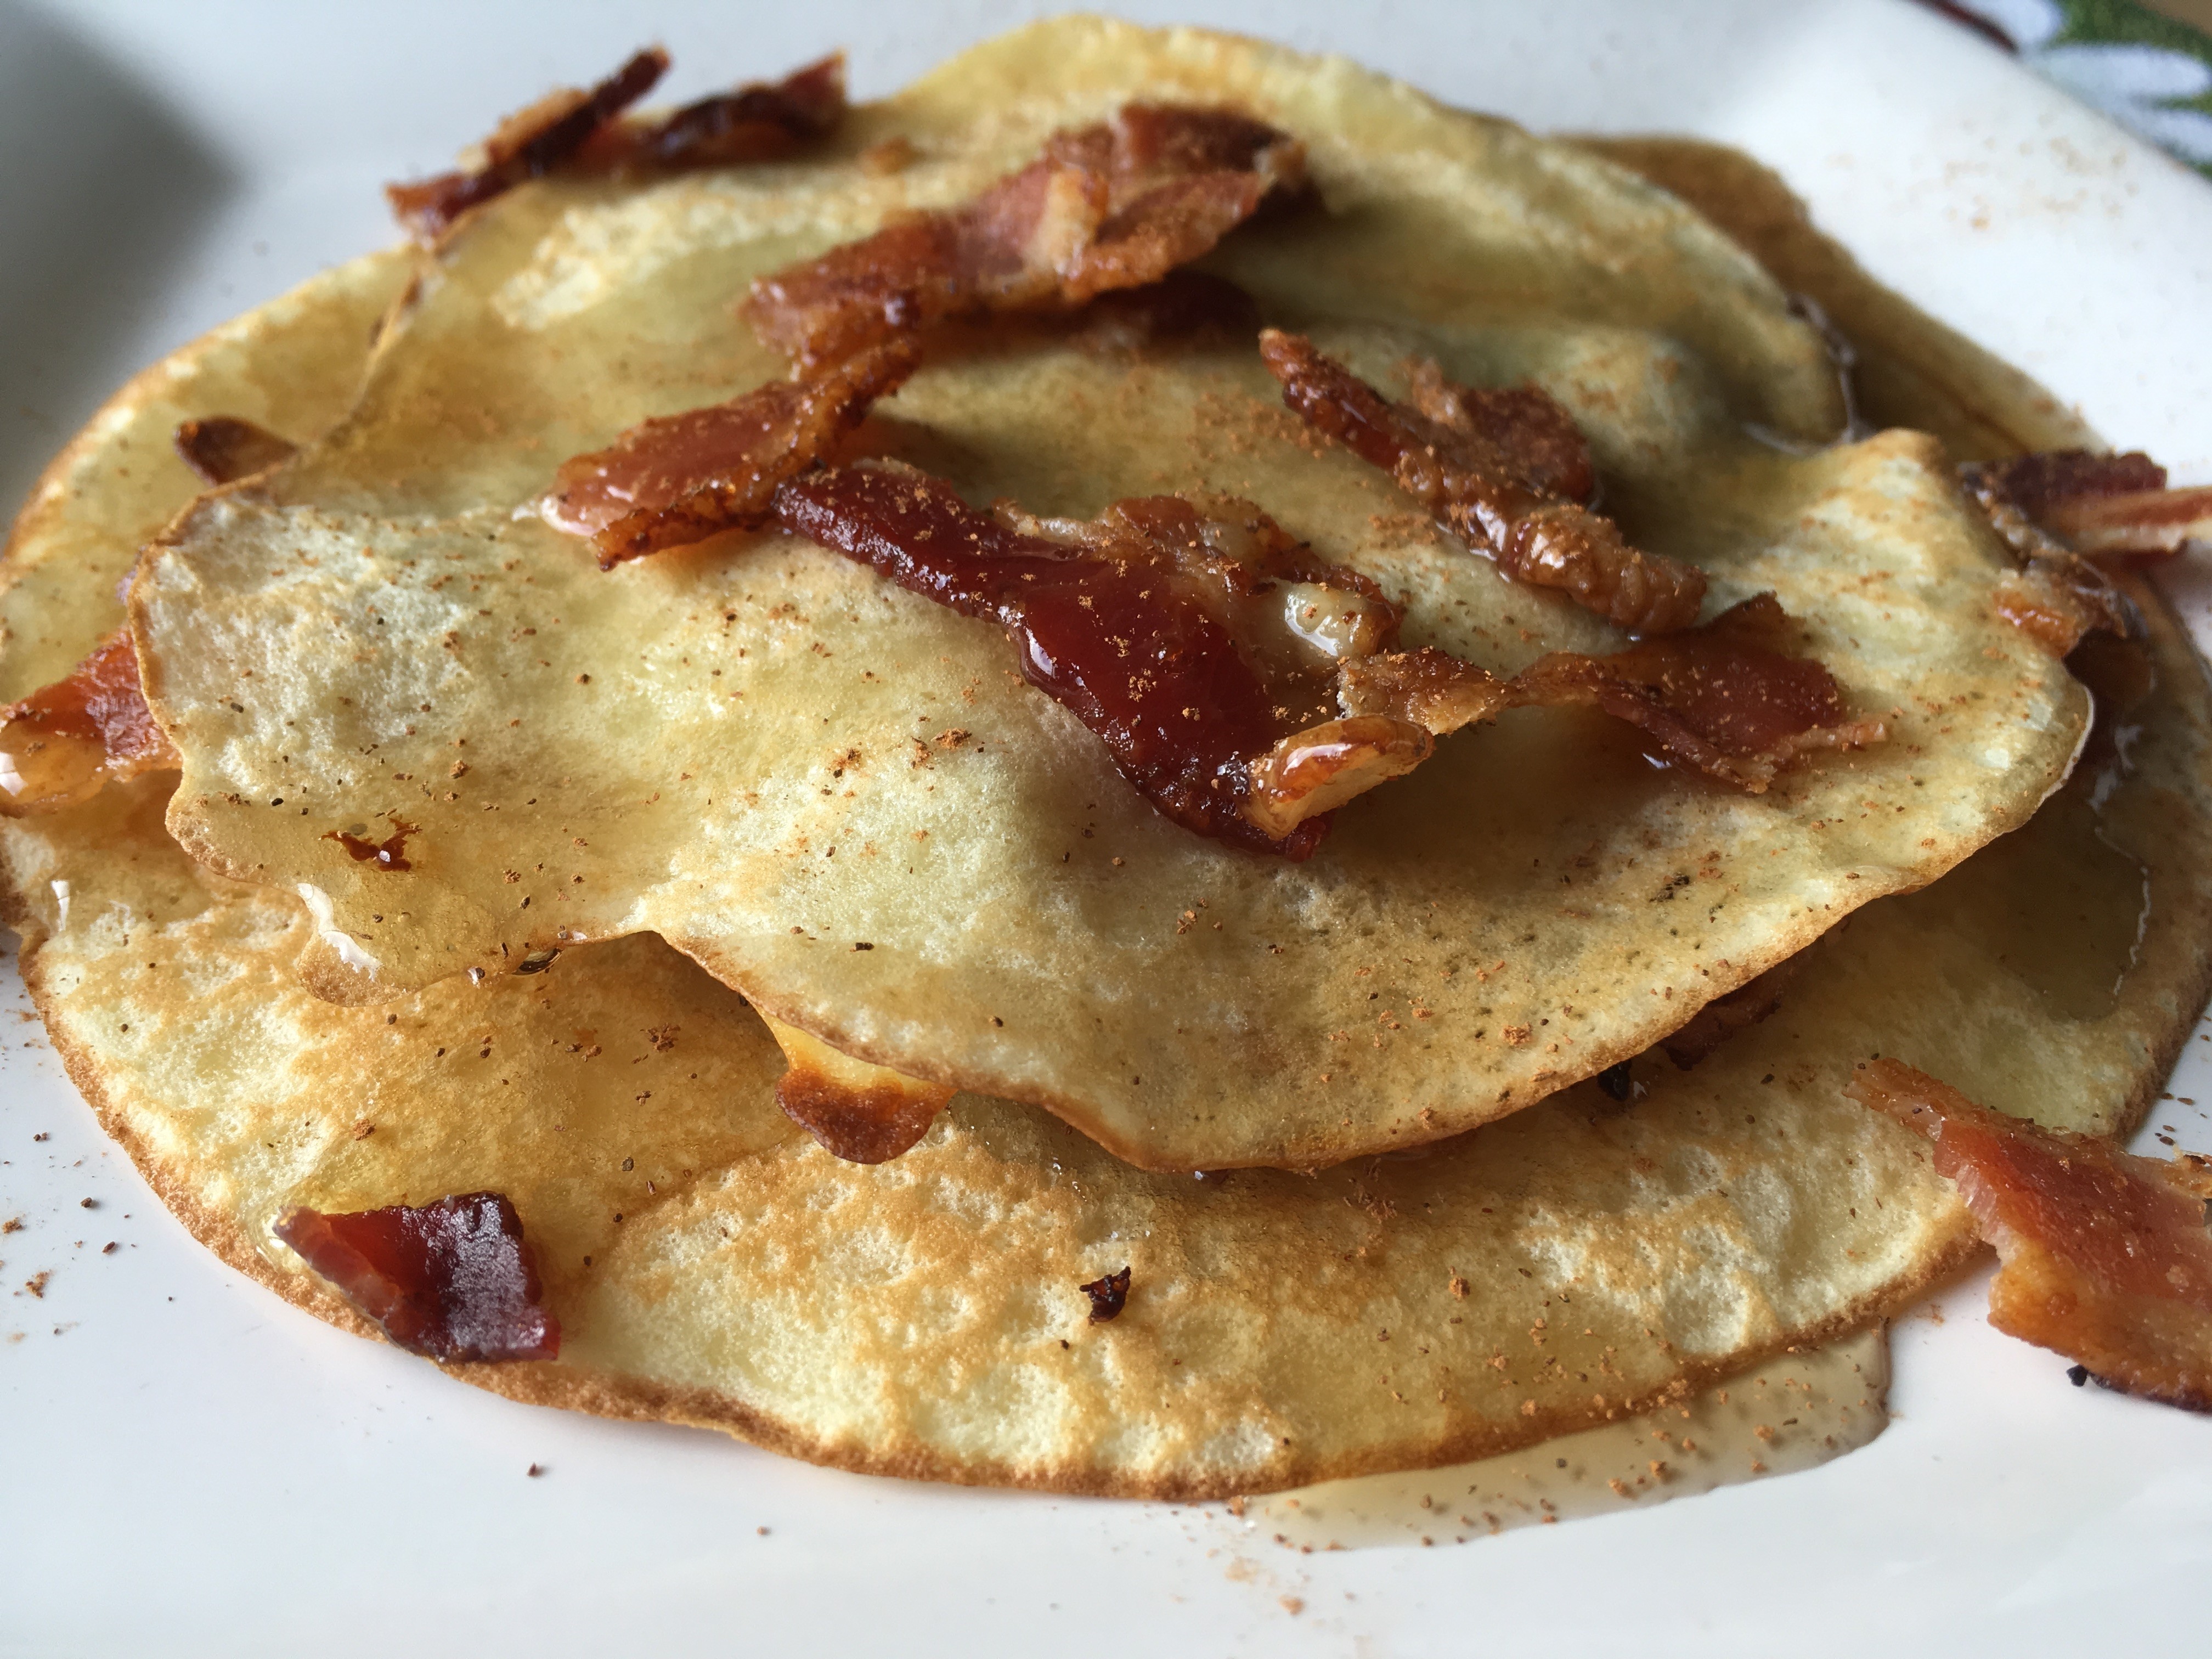 Maple Bacon Crepe Stack